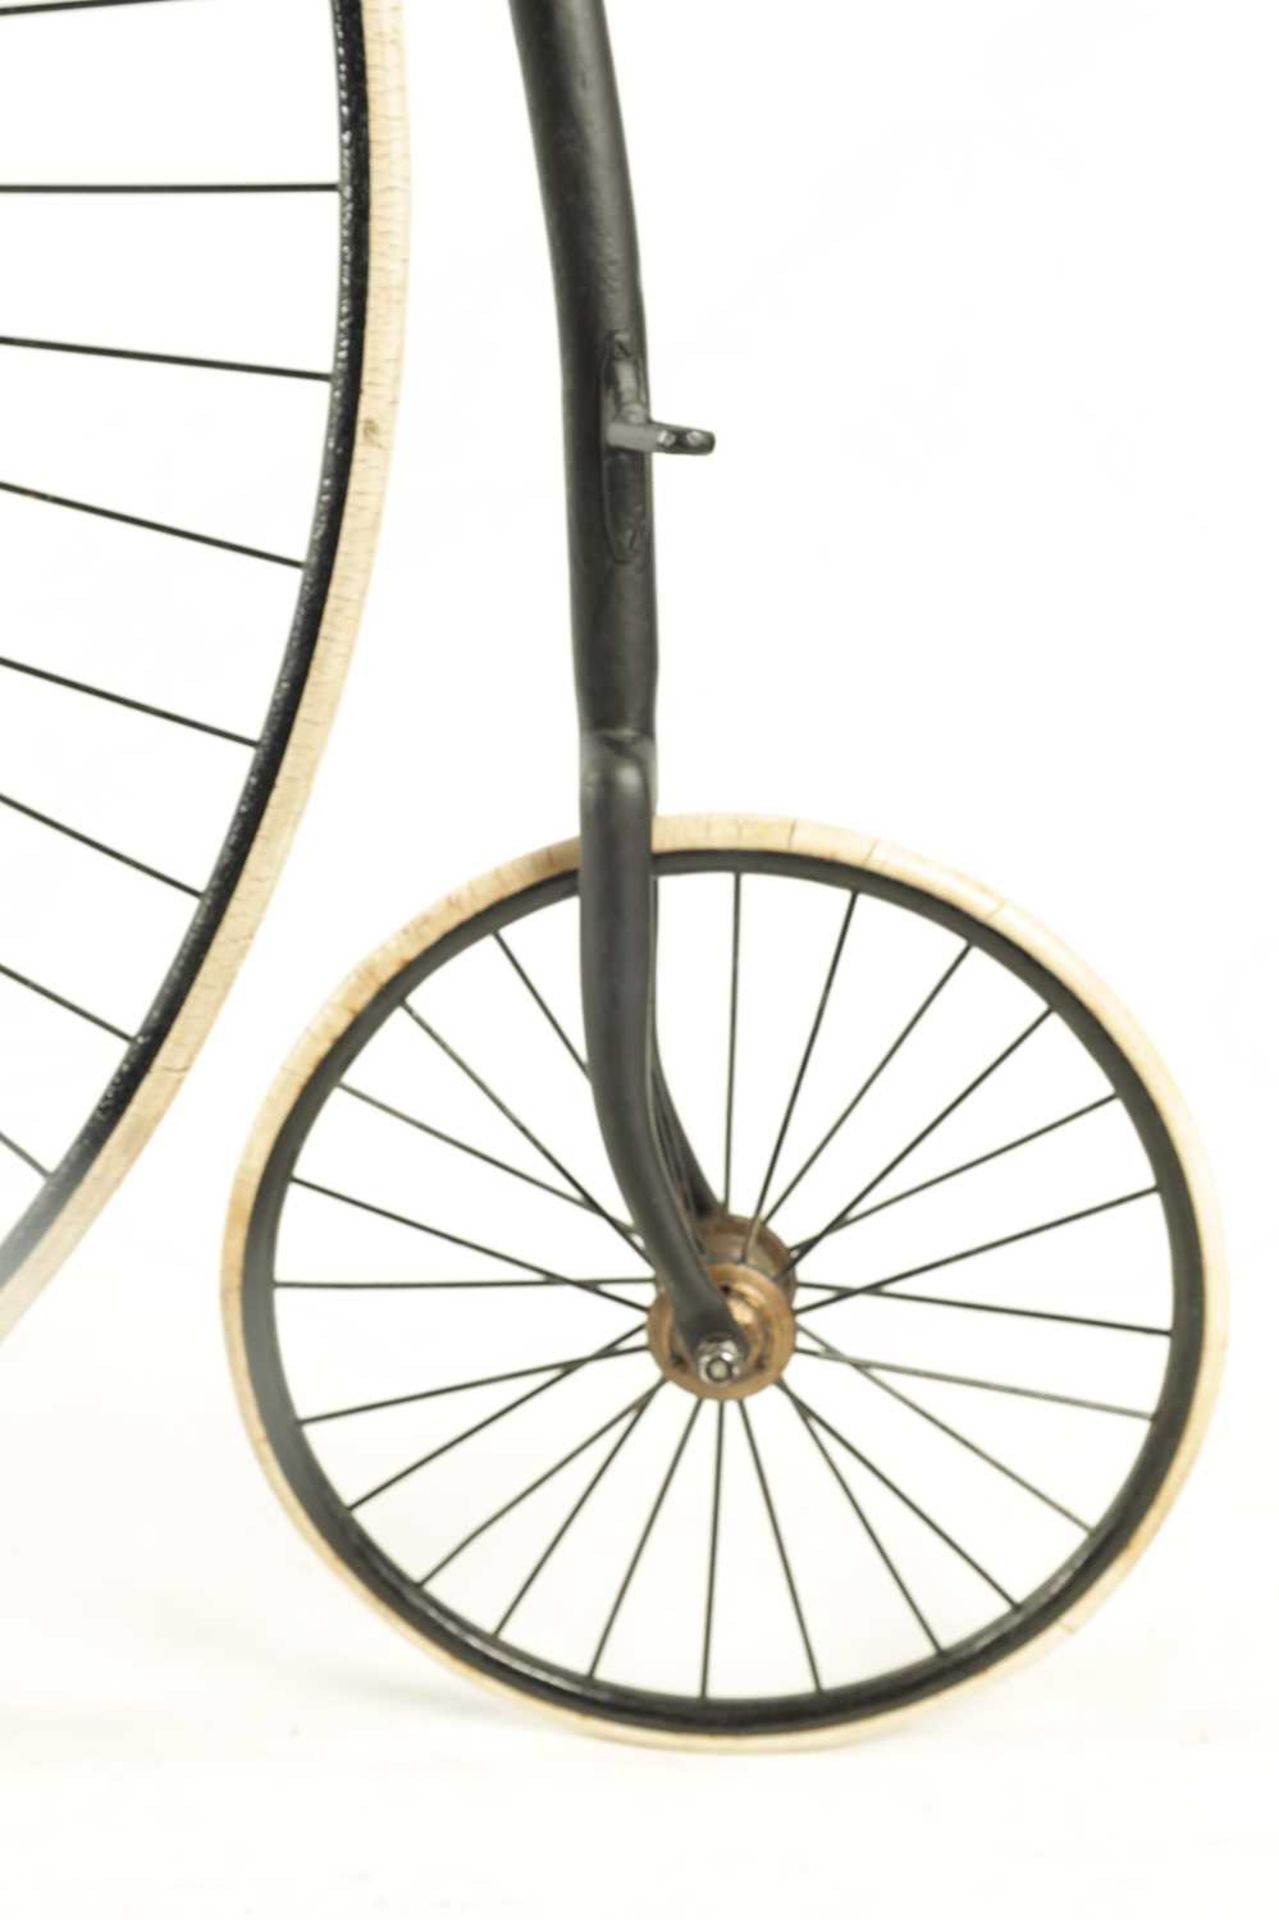 A LATE 19TH CENTURY PENNY FARTHING BICYCLE WITH 52” WHEEL - Bild 5 aus 7